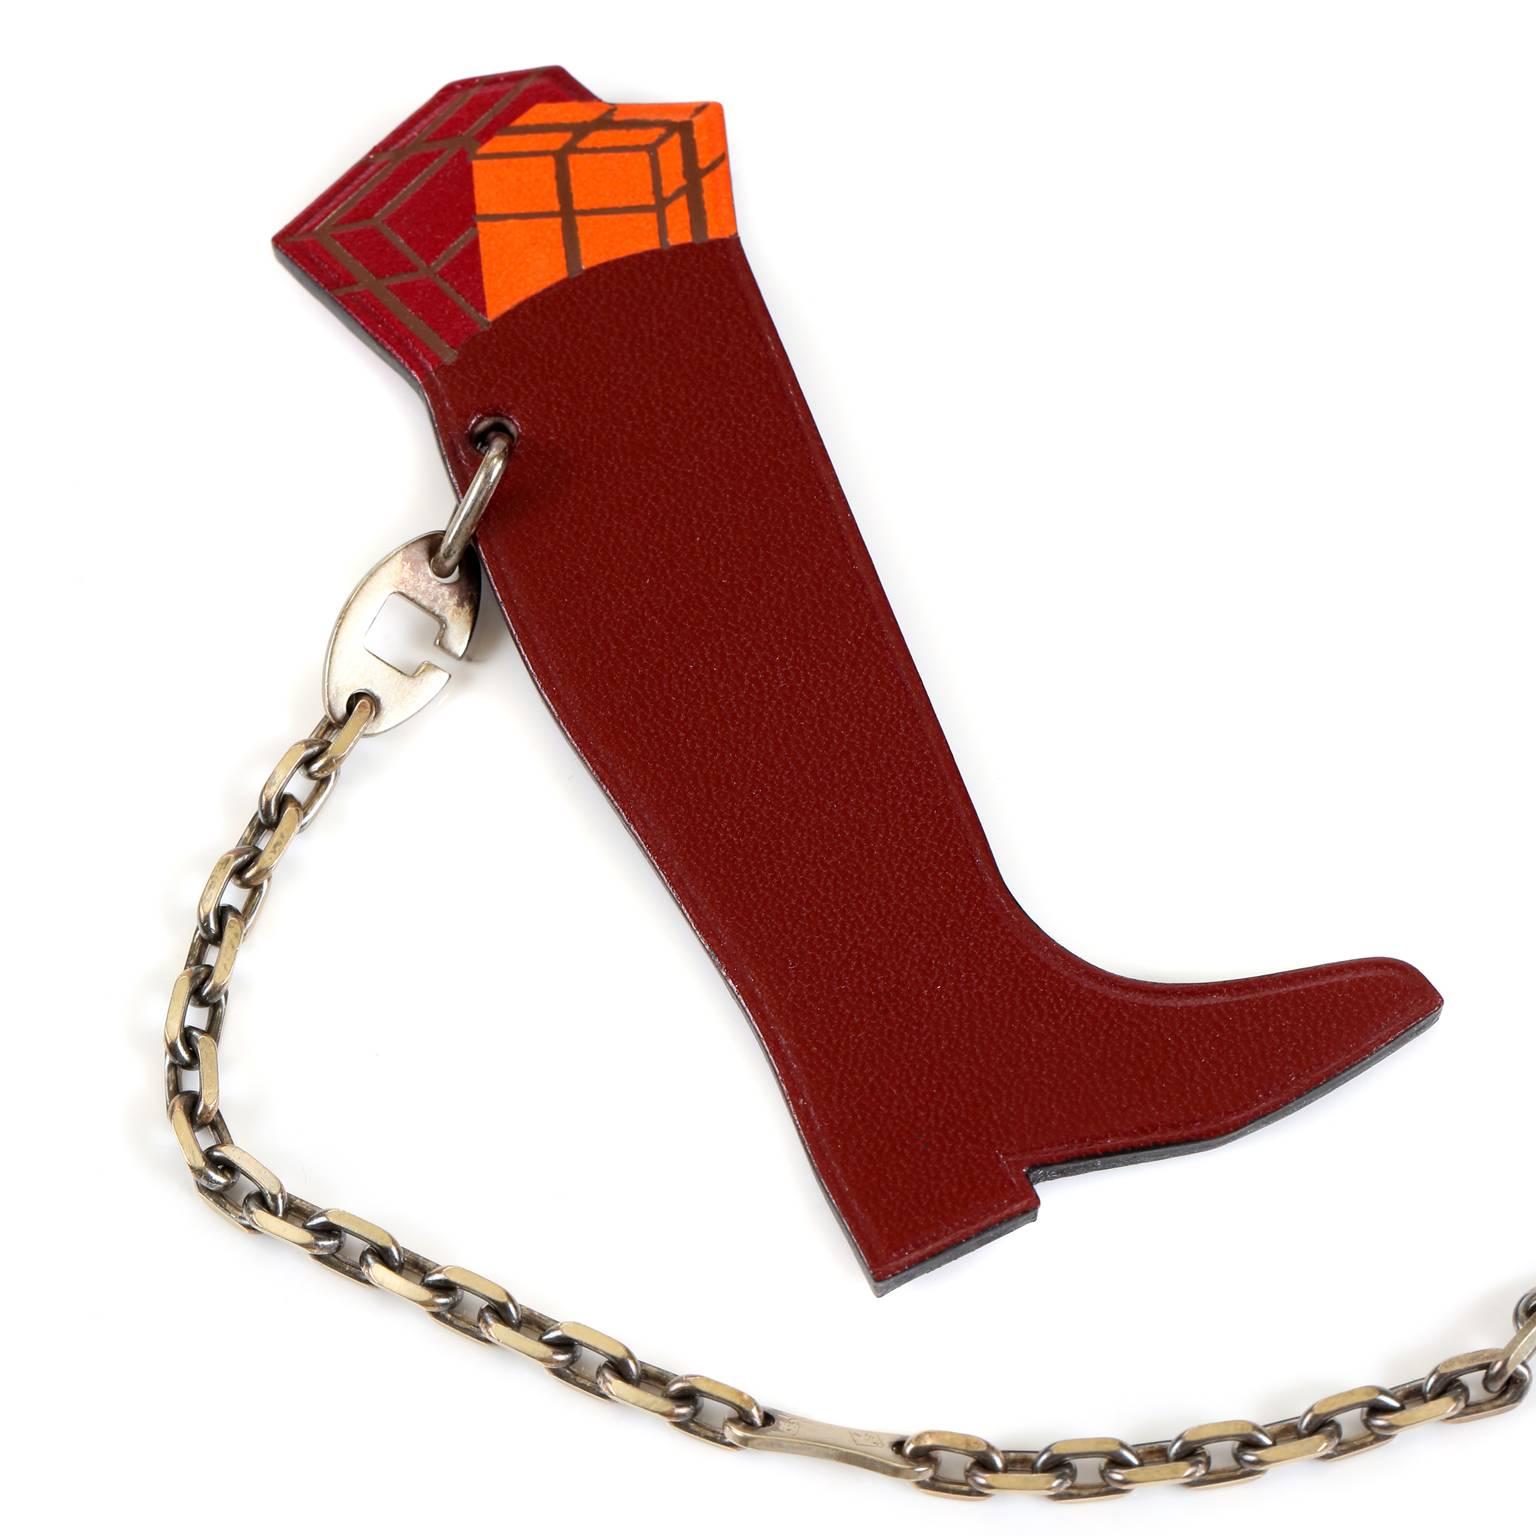 Hermes Hotte Botte Burgundy Leather Keychain In Excellent Condition For Sale In Malibu, CA